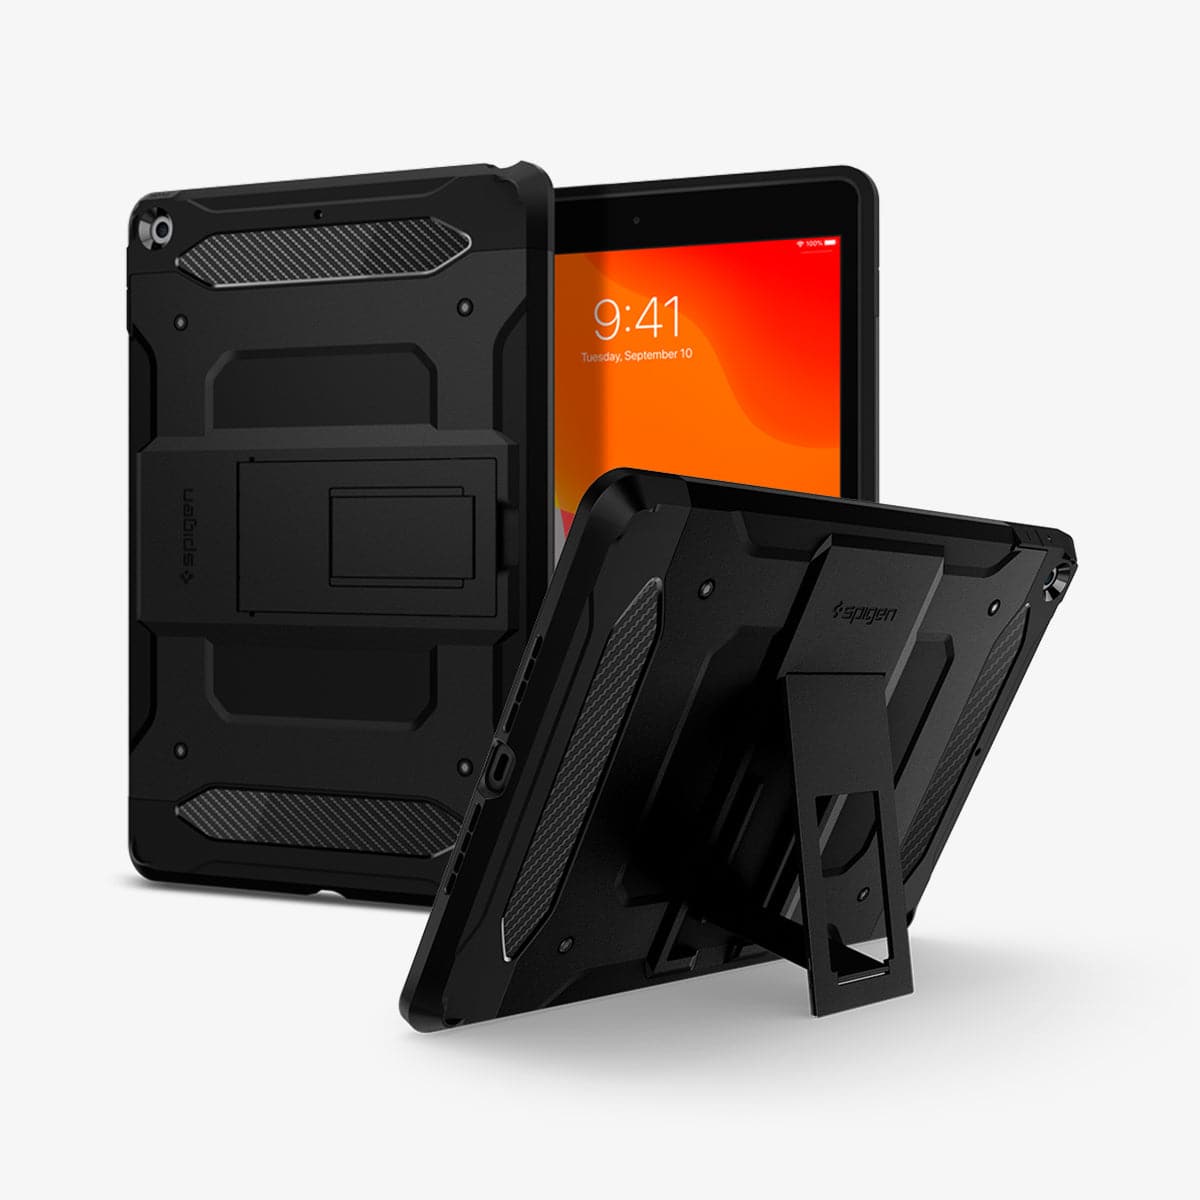 ACS00377 - iPad 10.2" Case Tough Armor Tech in black showing the back, front and device propped up by built in kickstand